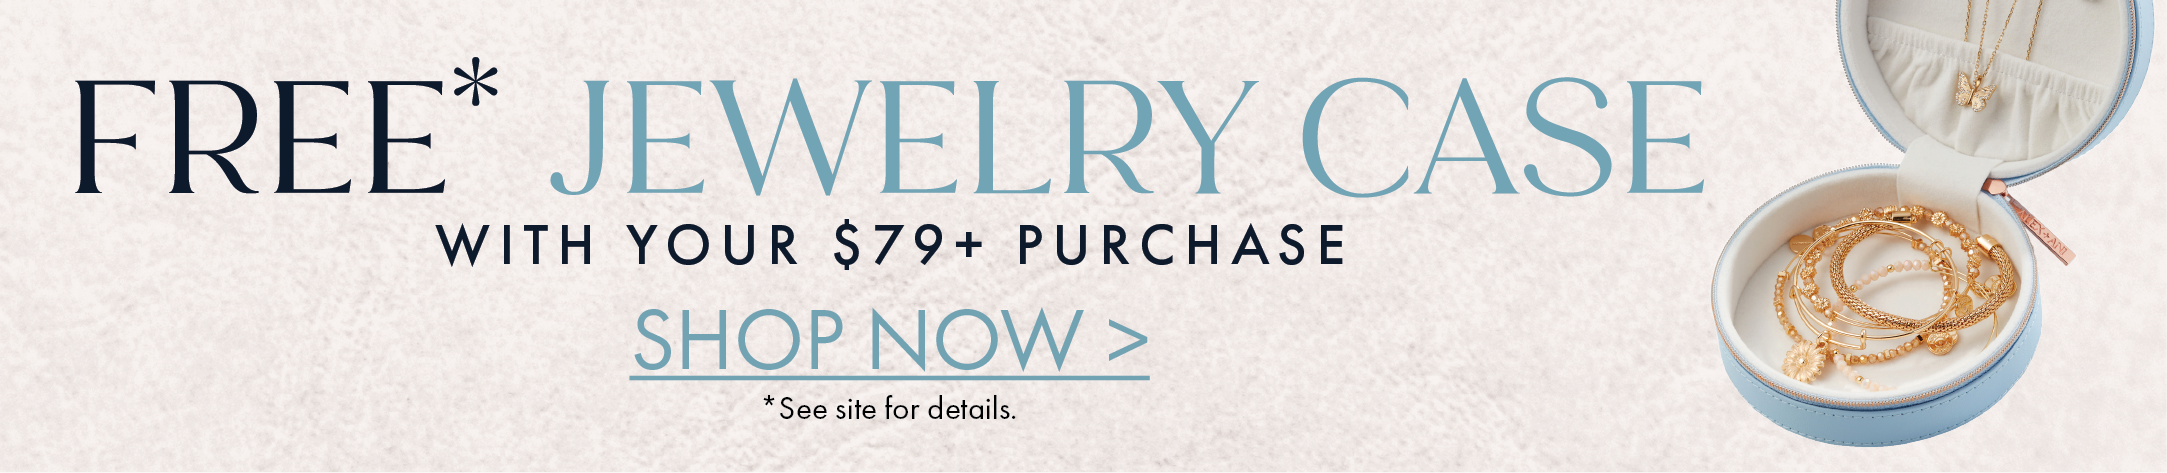 Get a FREE Jewelry Case with $79+ Purchase | Shop Now